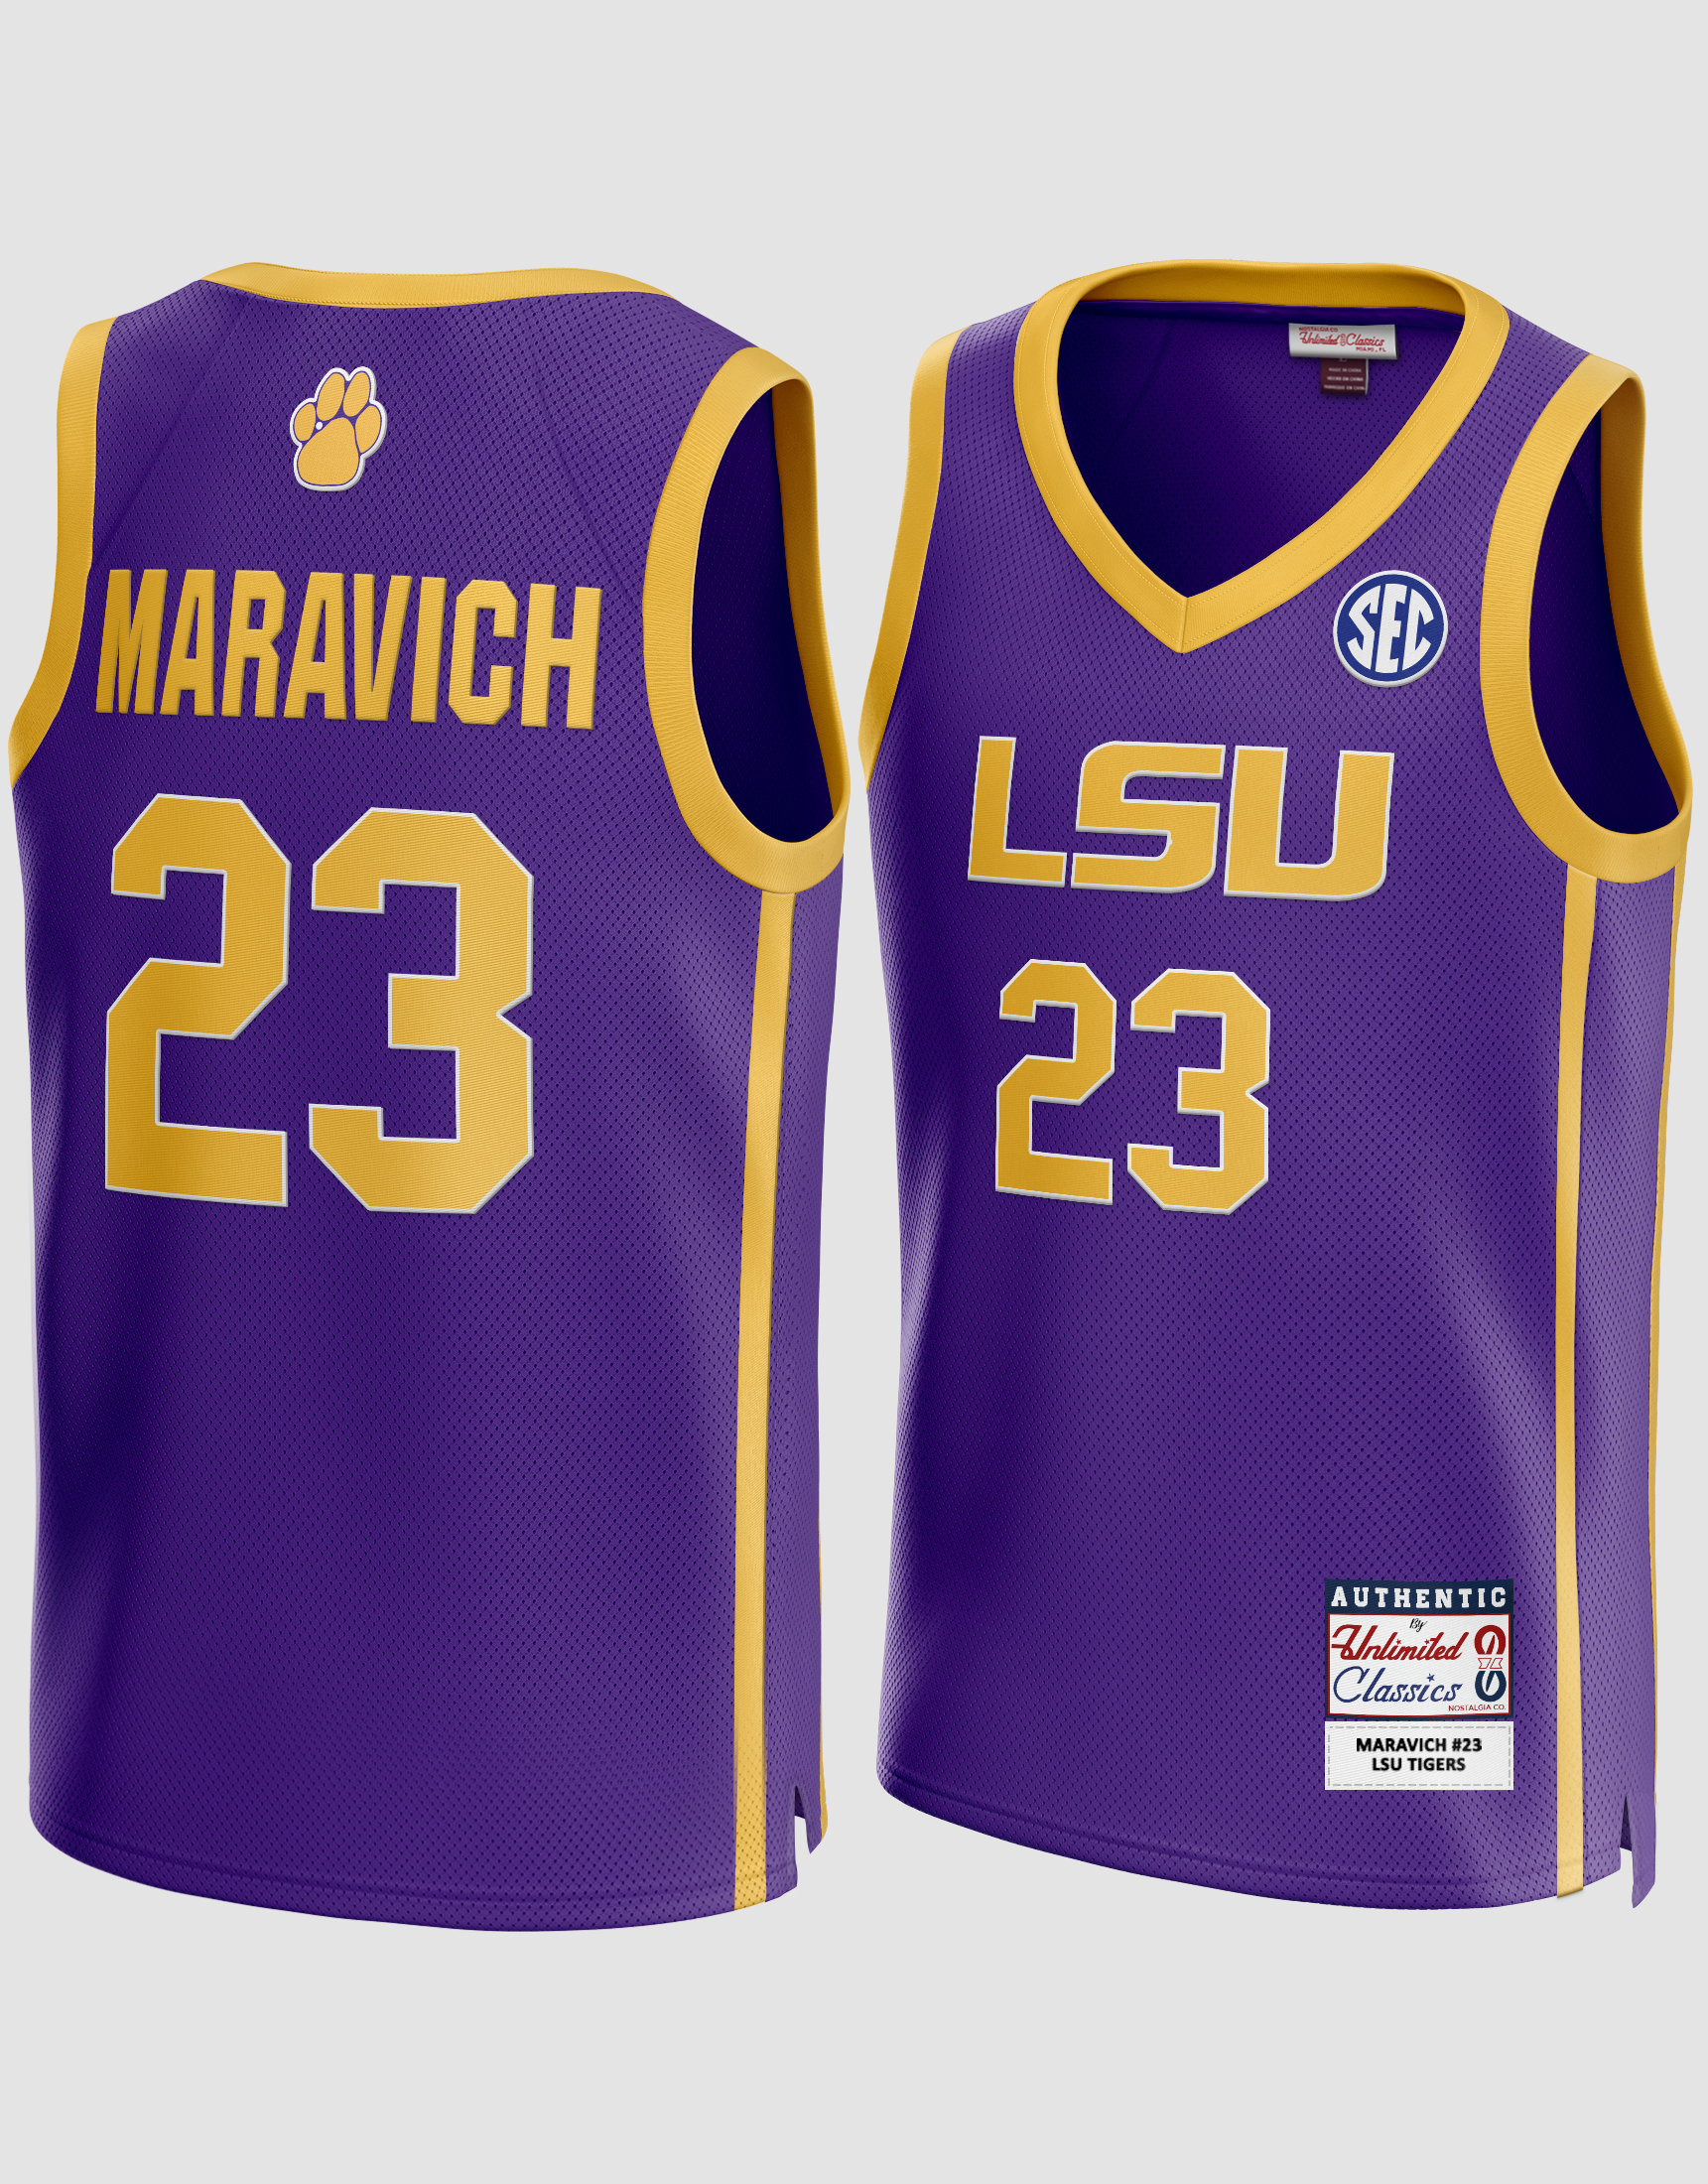 Pete Maravich's look was of the times but his game was timeless